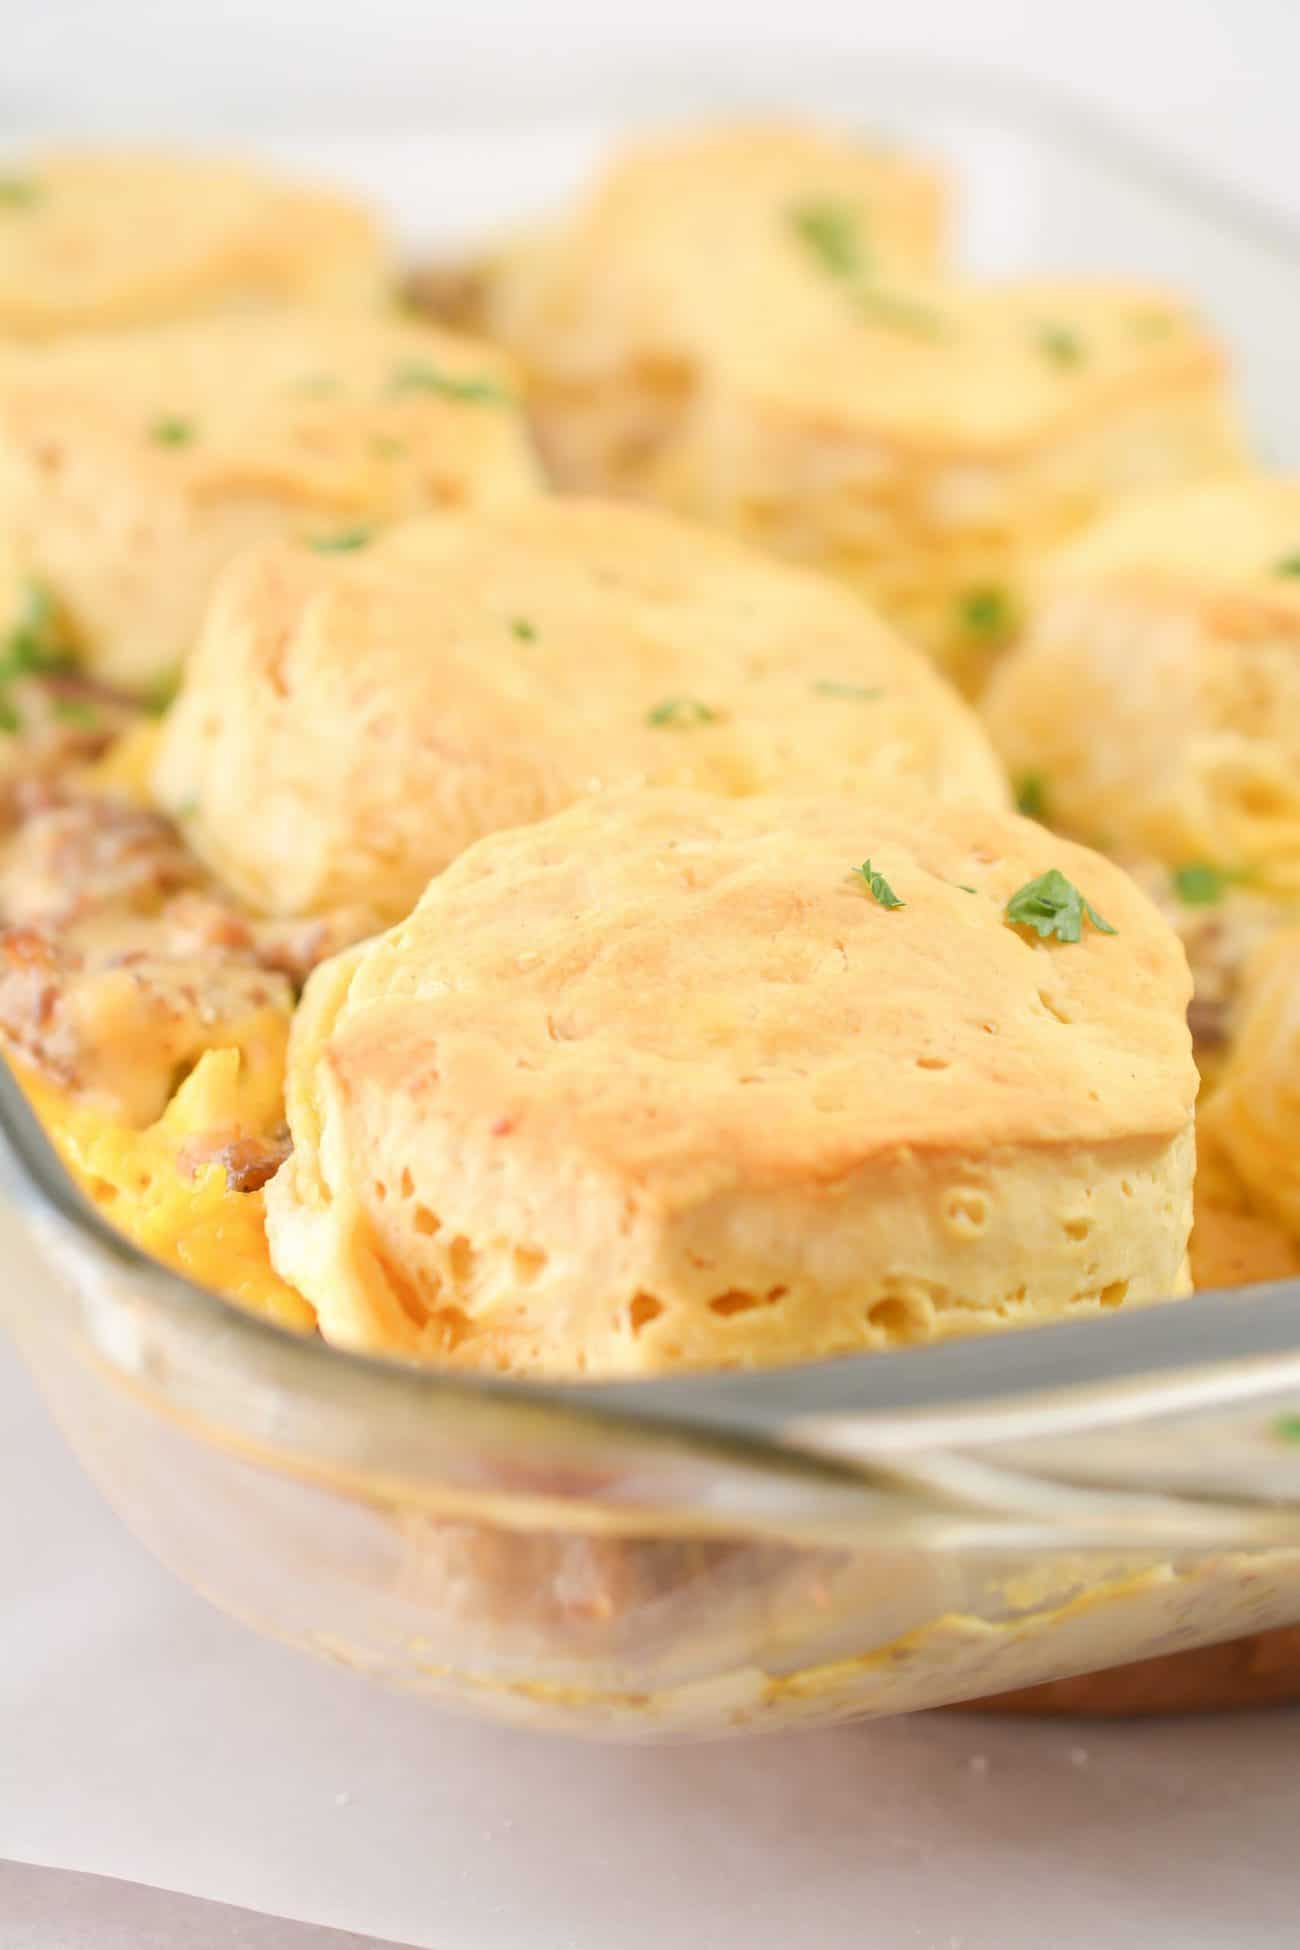 Biscuits and Gravy with Sausage and Egg Breakfast Casserole